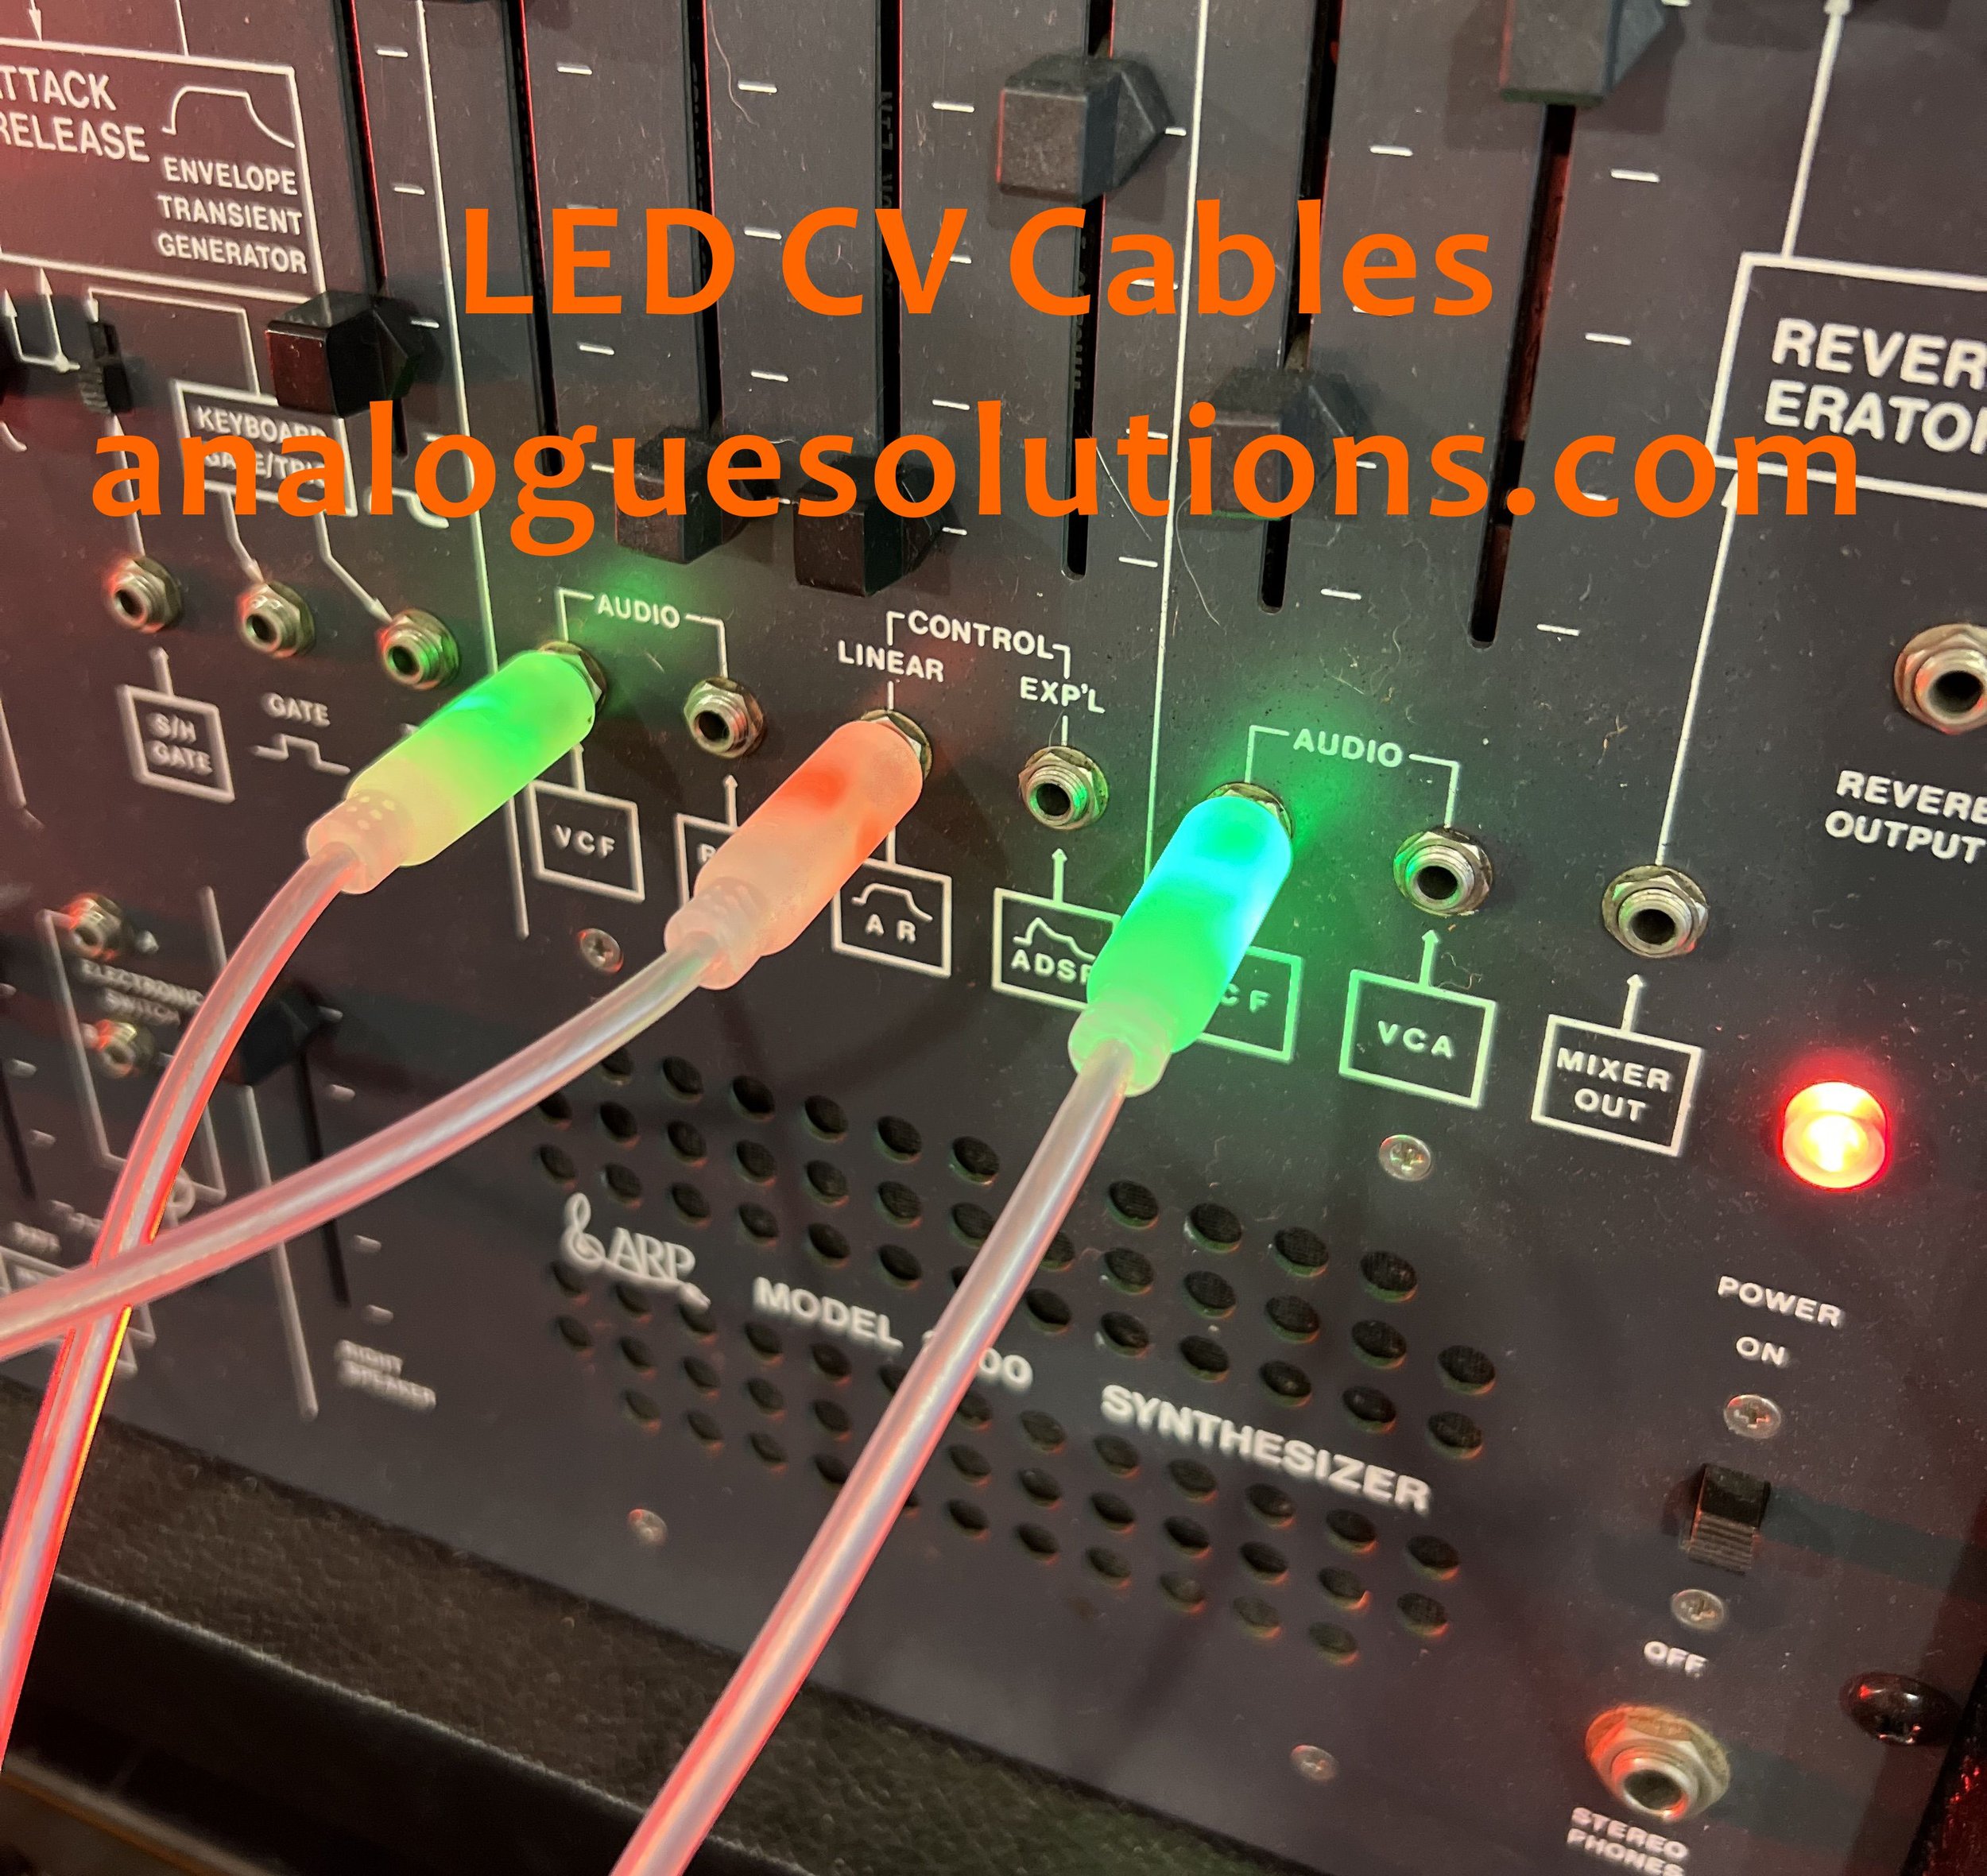 analogue solutions led cv cables arp2600.JPG